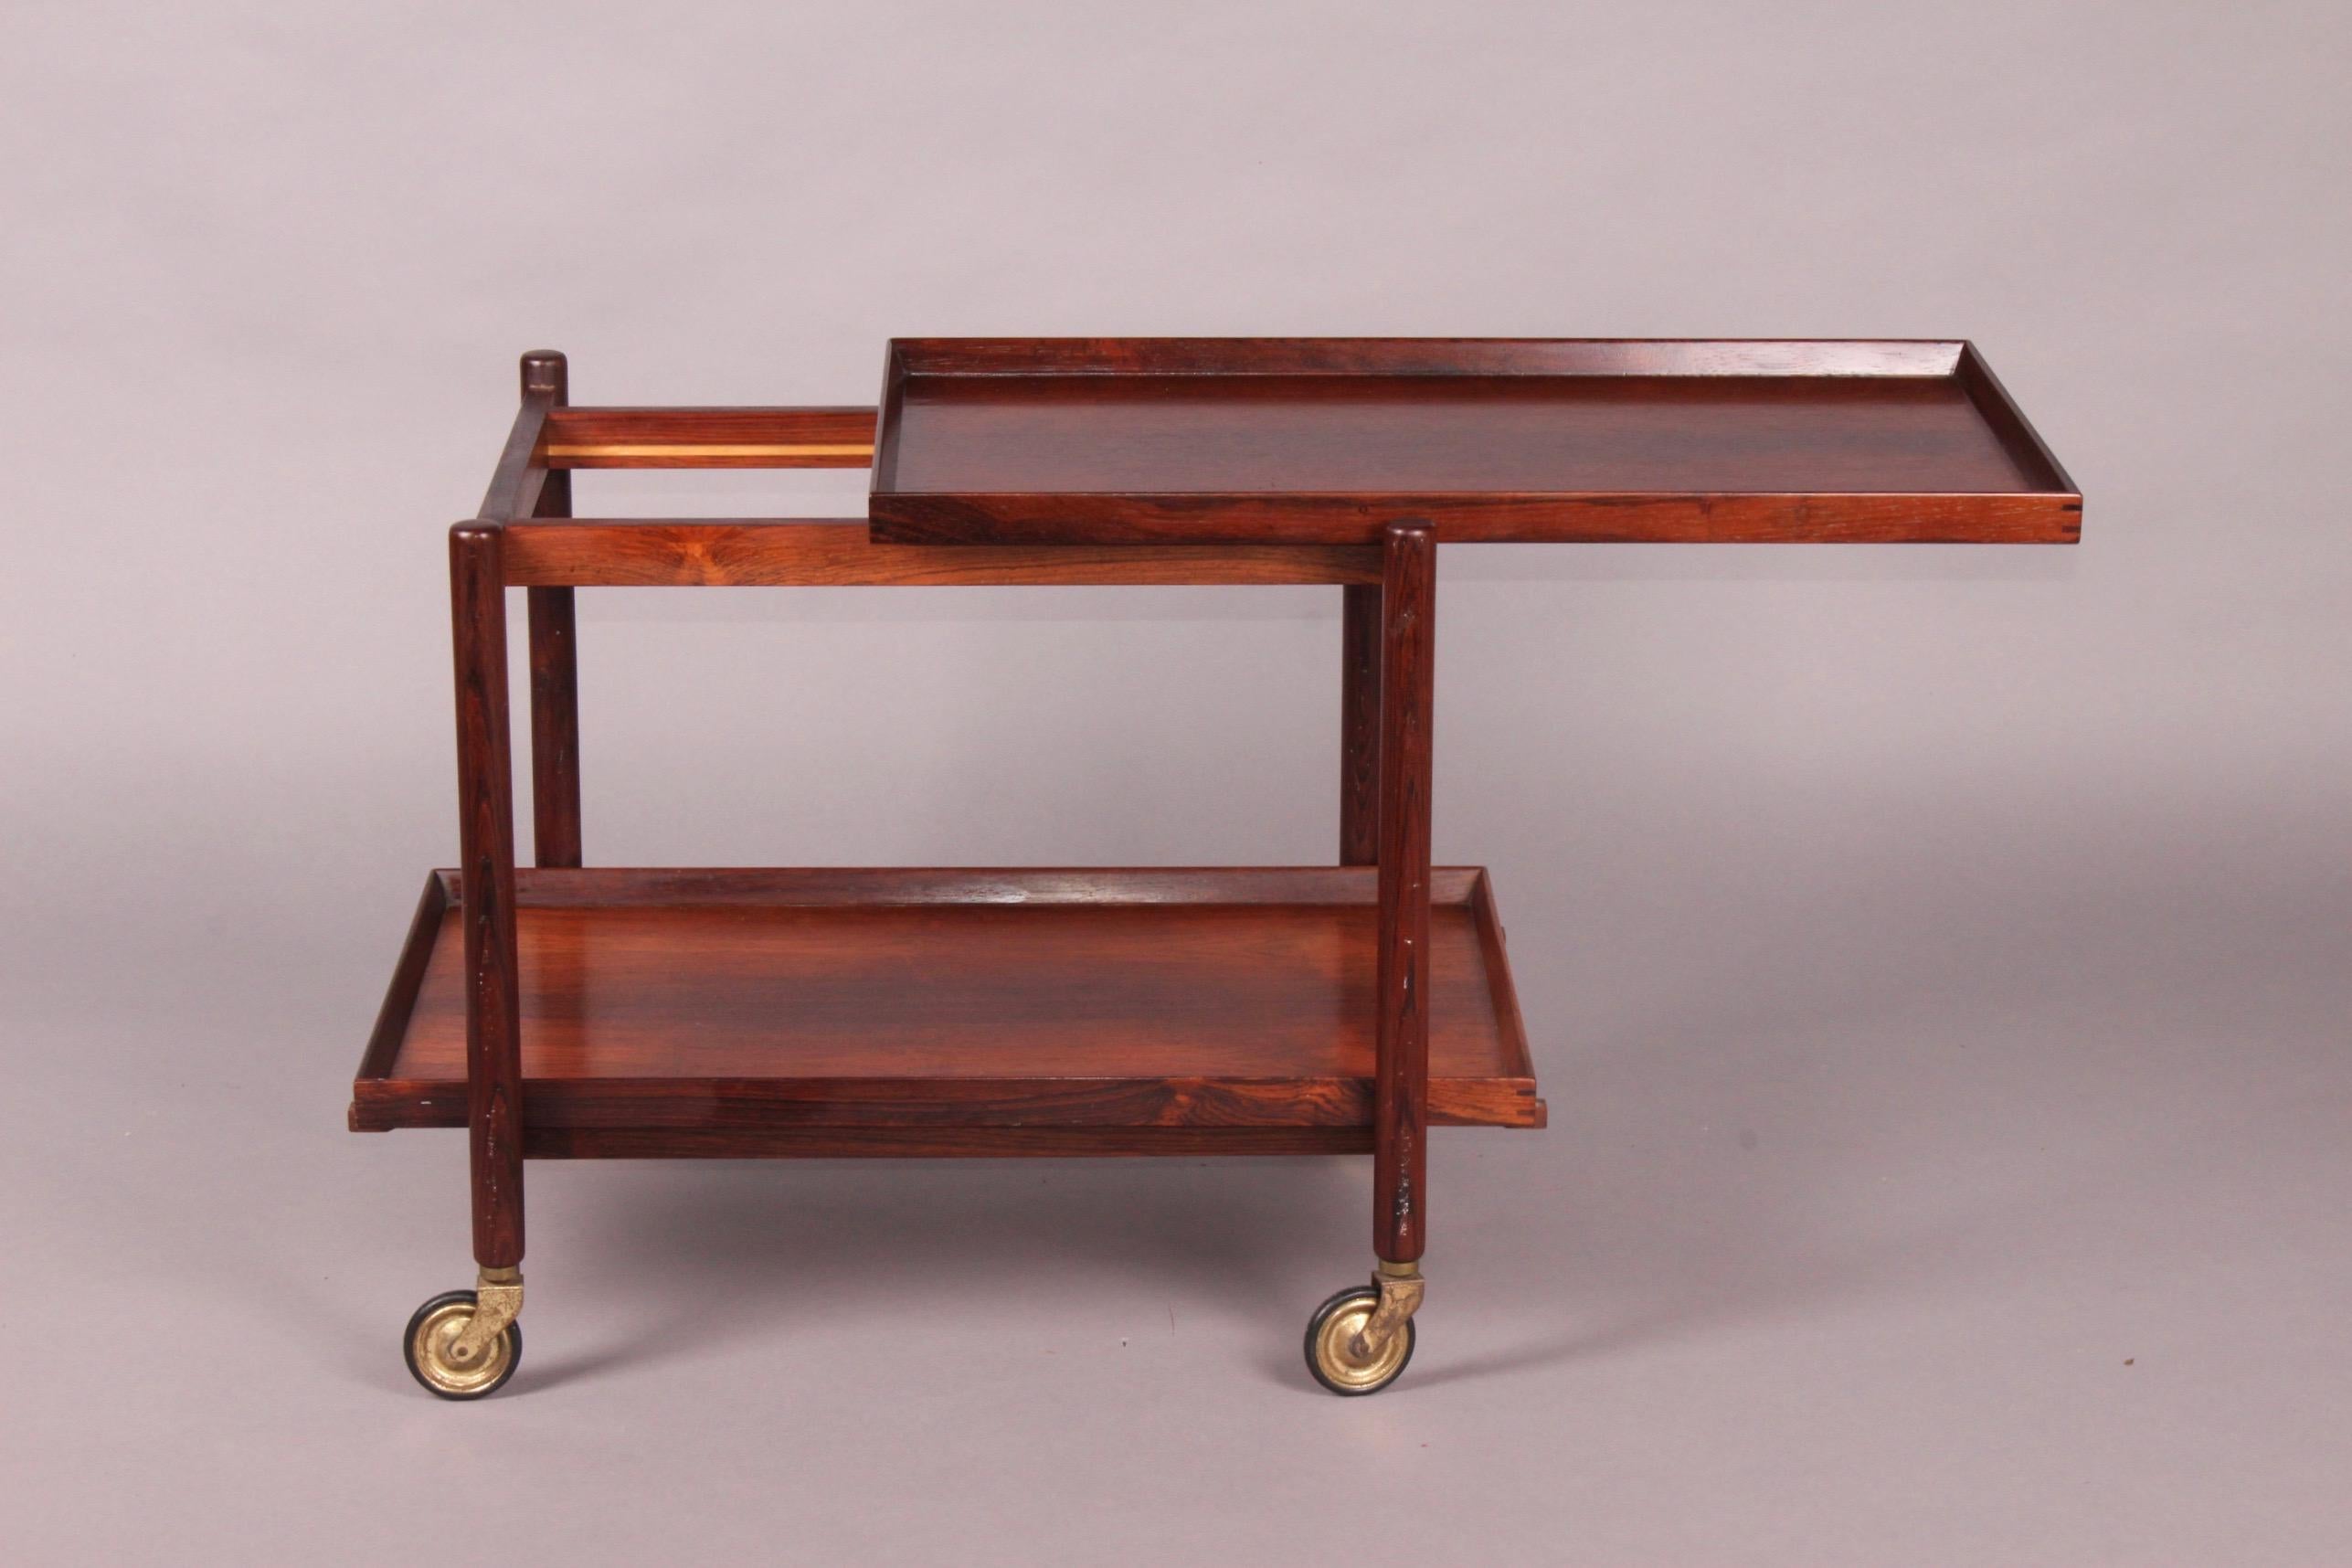 Vintage Poul Hundevad rosewood Mid-Century bar cart. This unique design allows for the bottom tray to be removed and added to the top to expand the serving surface. Brass and rubber casters. Expands to 60 inches when bottom shelf is removed and